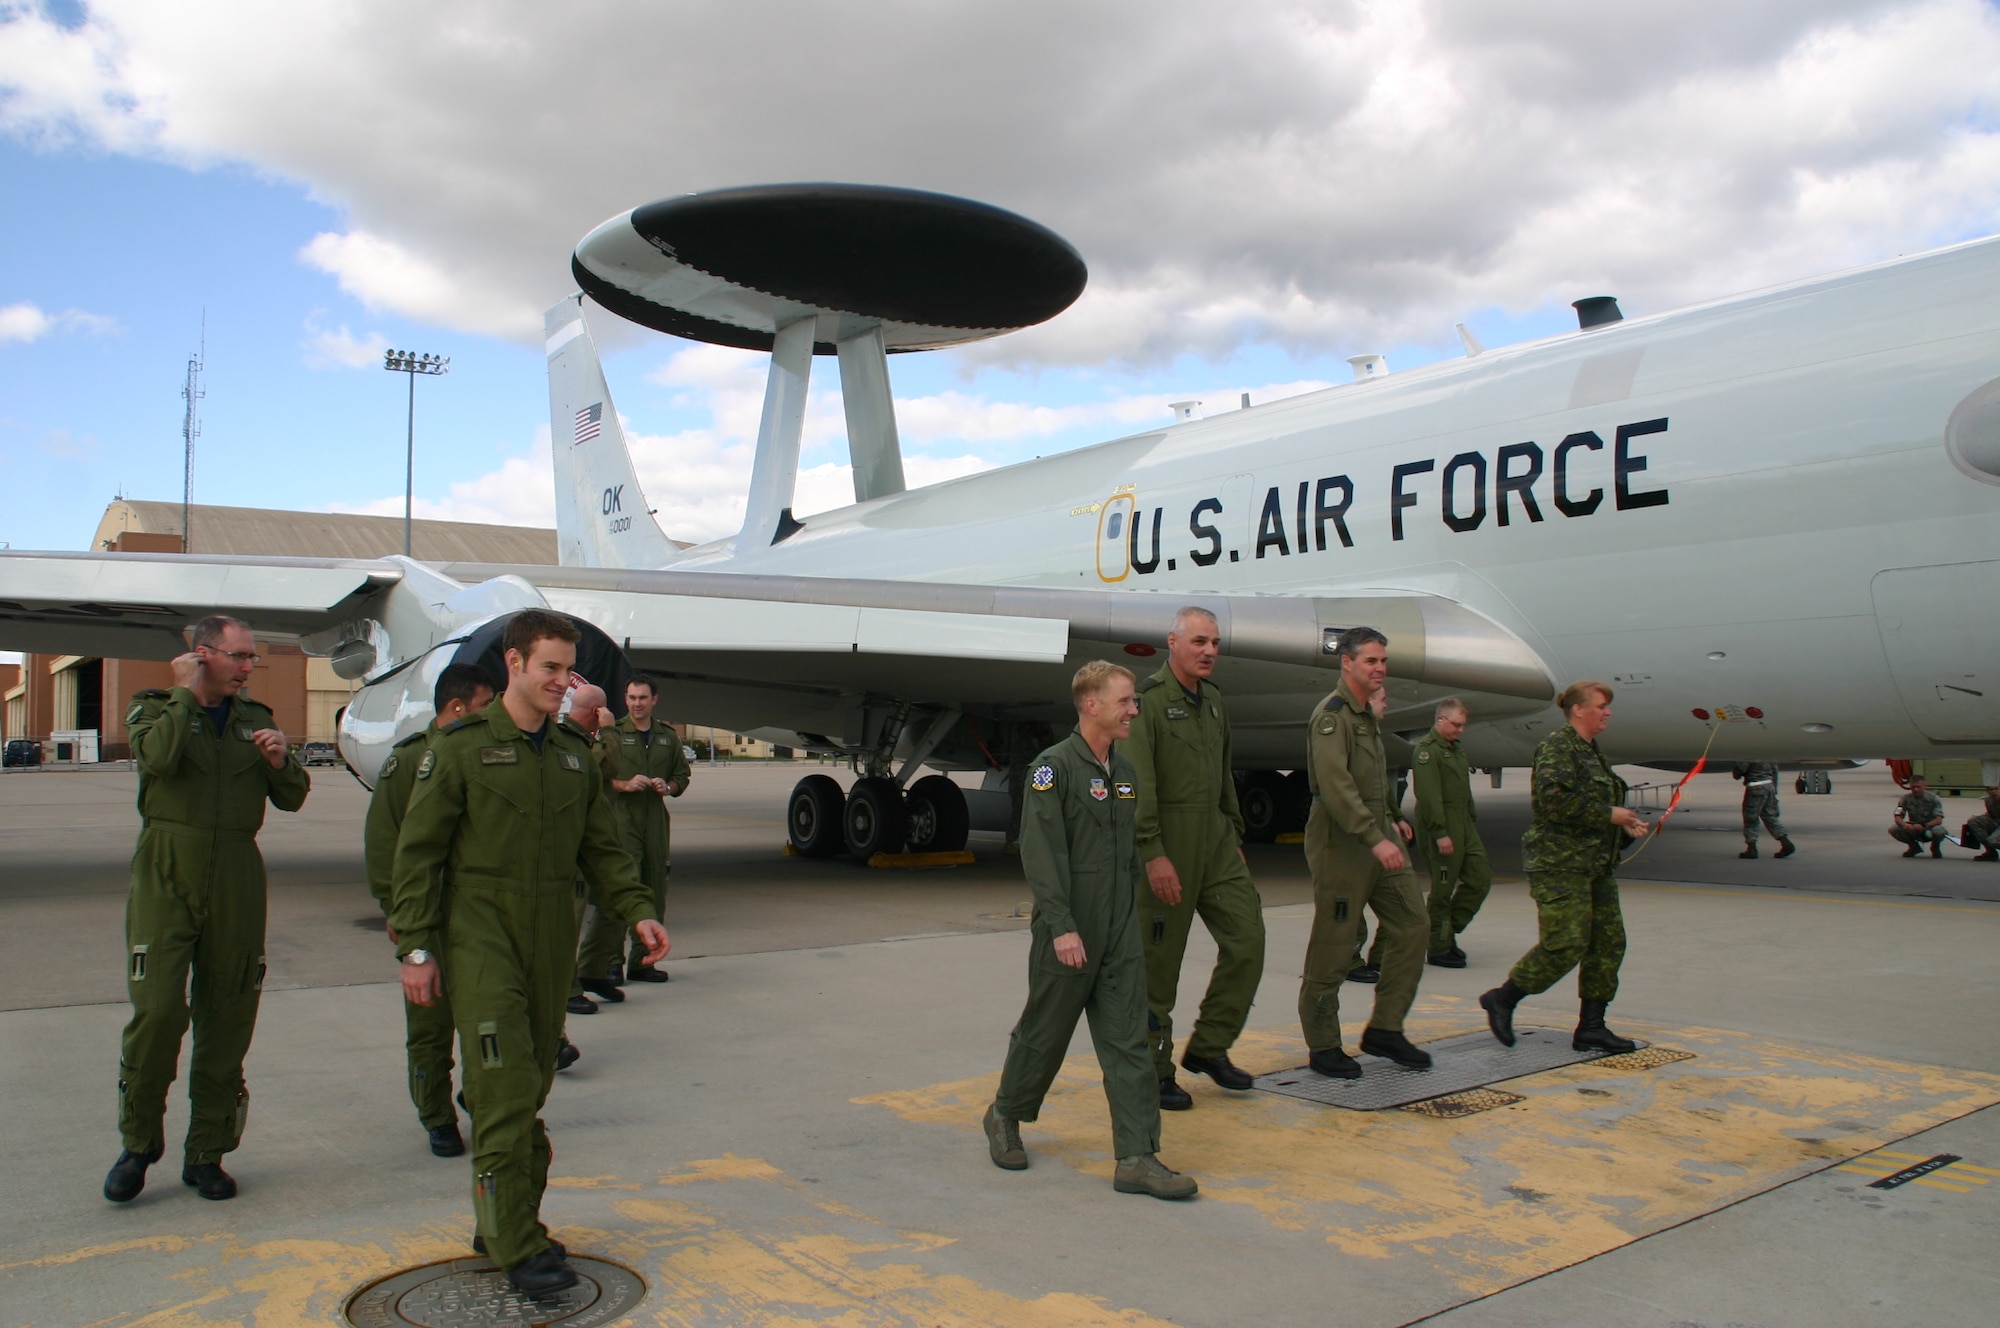 Col. Scott Forest, vice commander, 552 ACW, walks away from the jet with his fellow crewmembers after taking distinguished visitor, Maj. Gen. Pierre Forgues, NORAD J3, Canadian Forces, on an orientation flight September 22. The crew for the sortie was composed of almost entirely Canadians, a first in 552 ACW history. Photo courtesy of 1st Lt. Kinder Blacke.